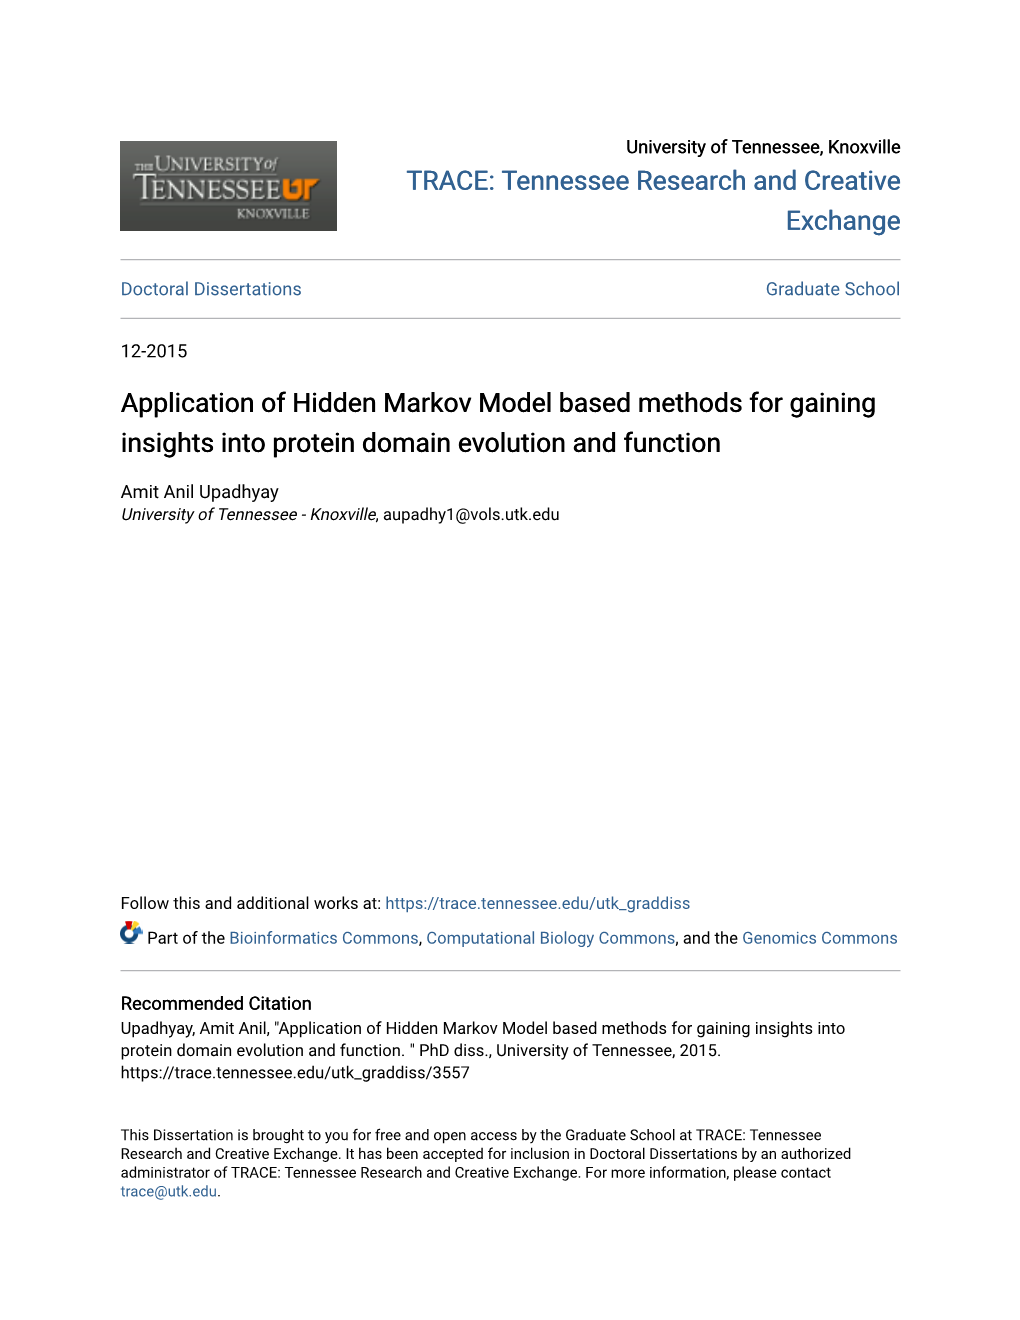 Application of Hidden Markov Model Based Methods for Gaining Insights Into Protein Domain Evolution and Function